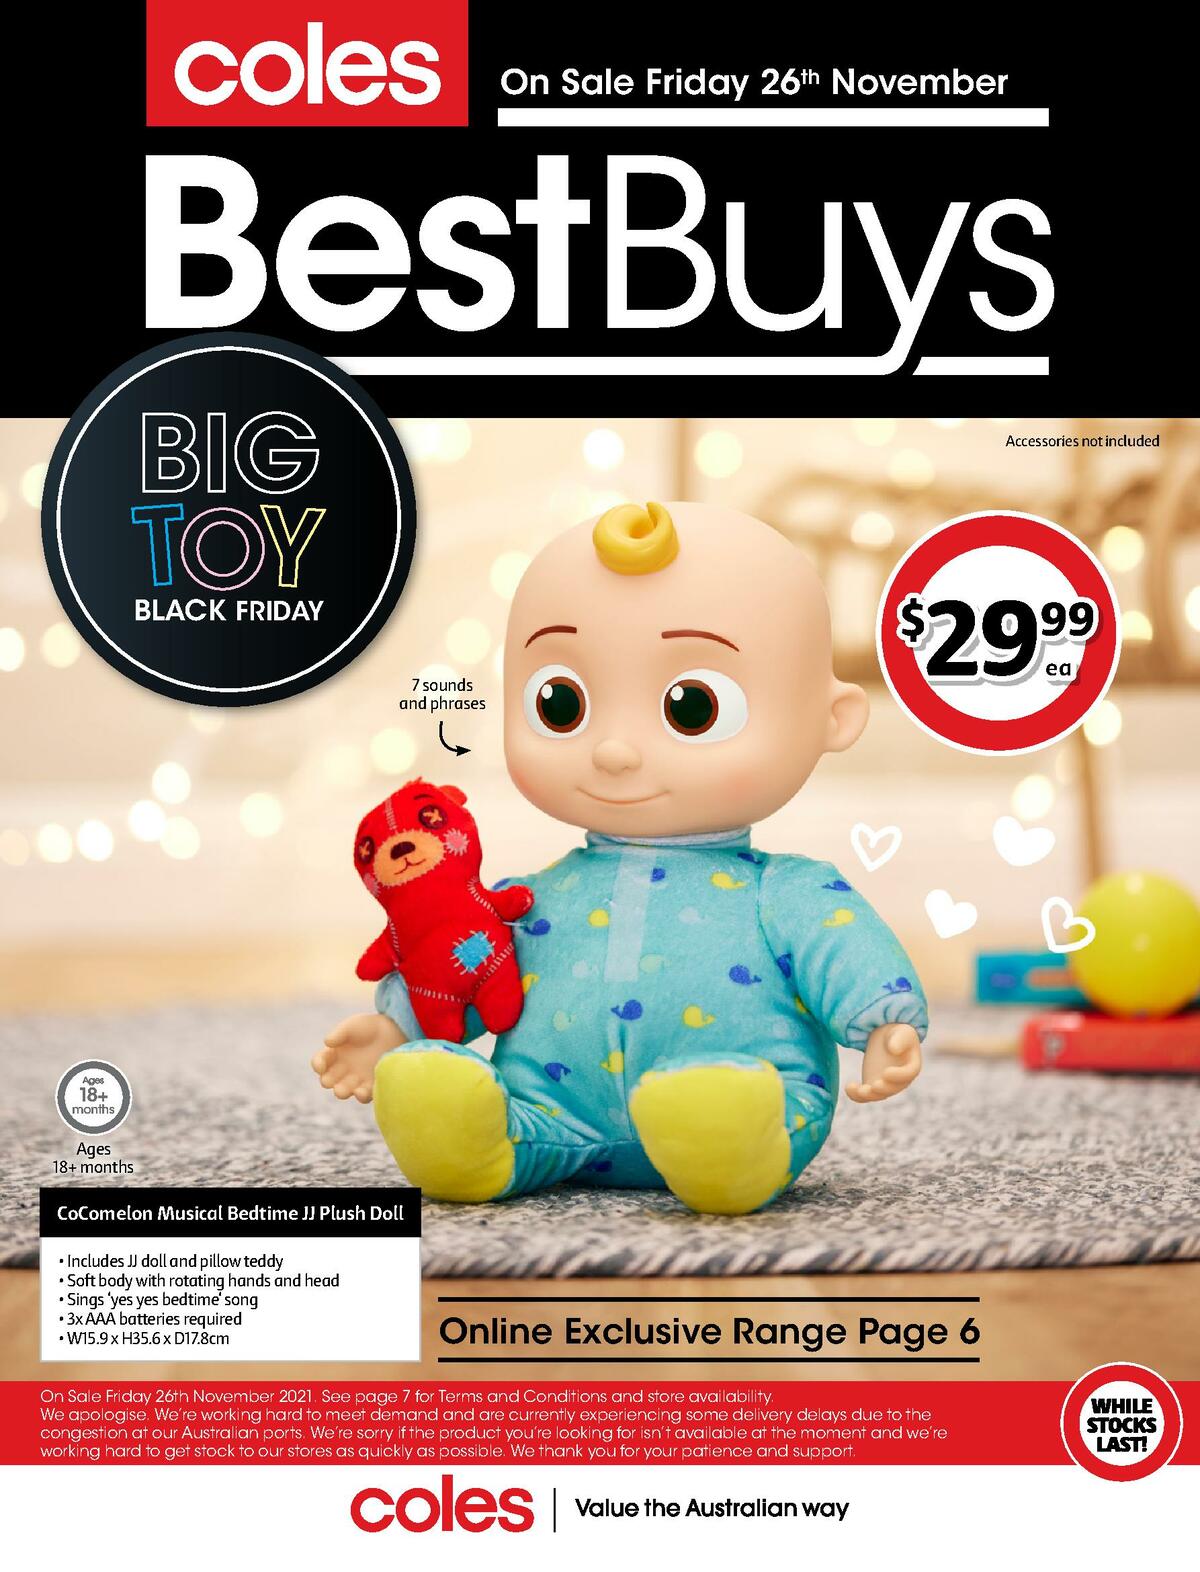 Coles Best Buys - Big Toy Black Friday Catalogues from November 26